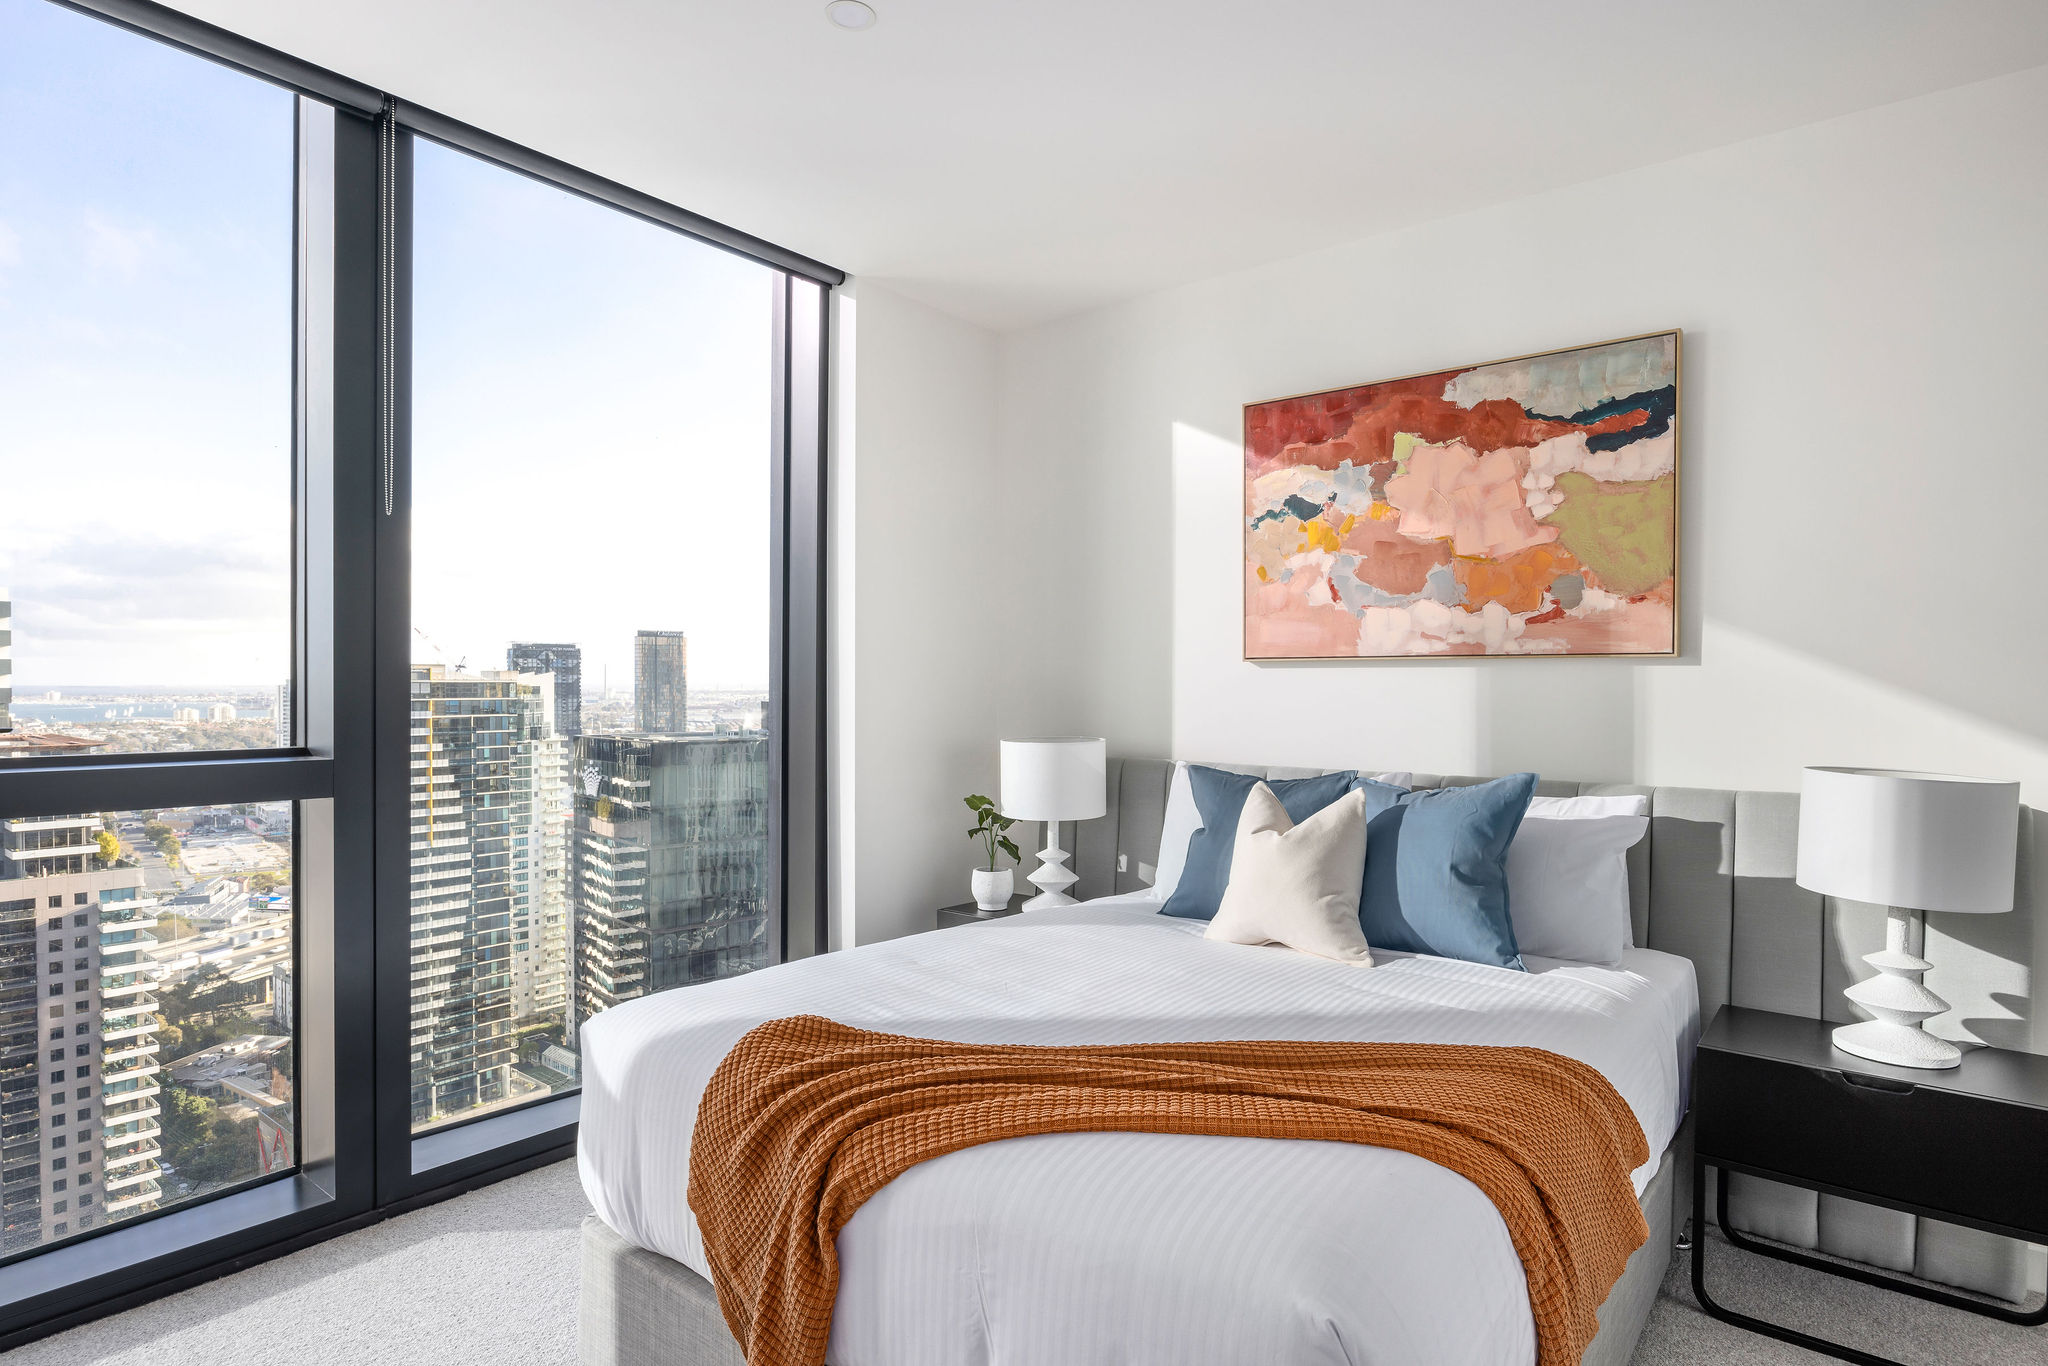 Bedroom - Three Bedroom Apartment - Home Southbank Melbourne - Urban Rest